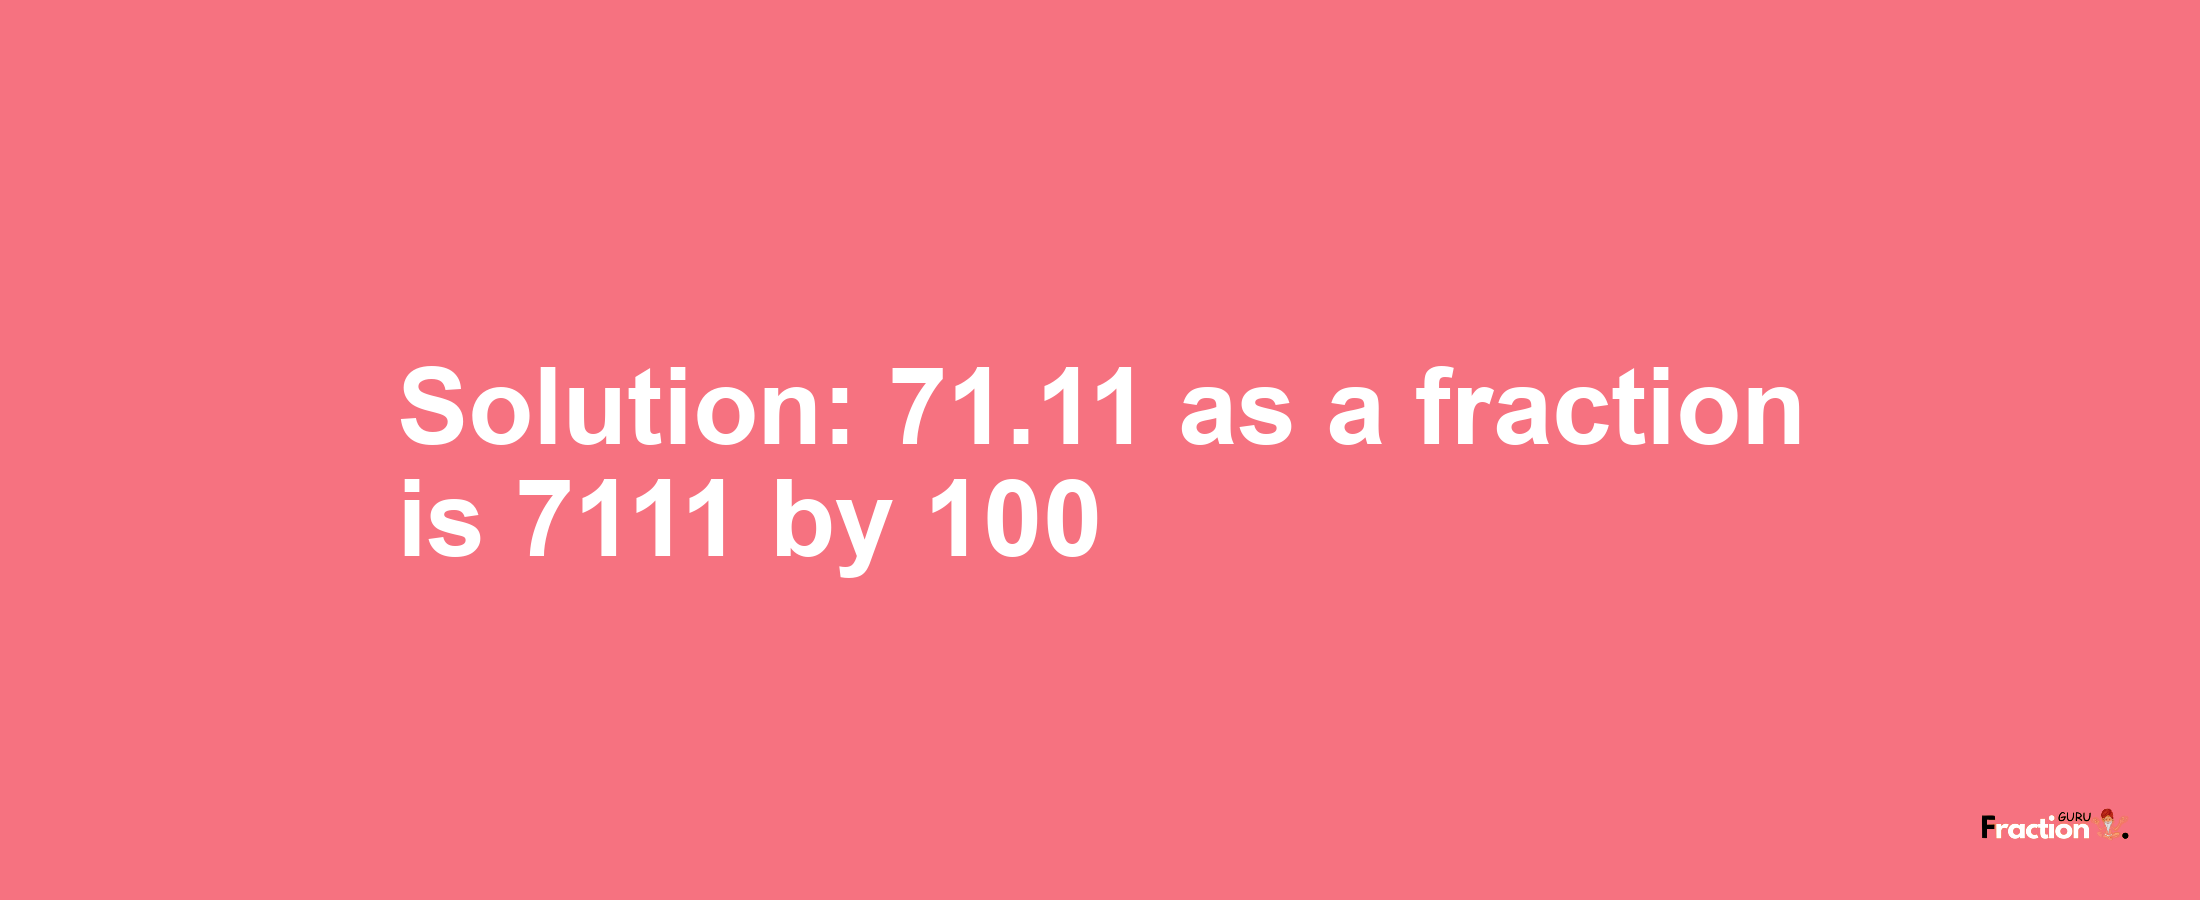 Solution:71.11 as a fraction is 7111/100